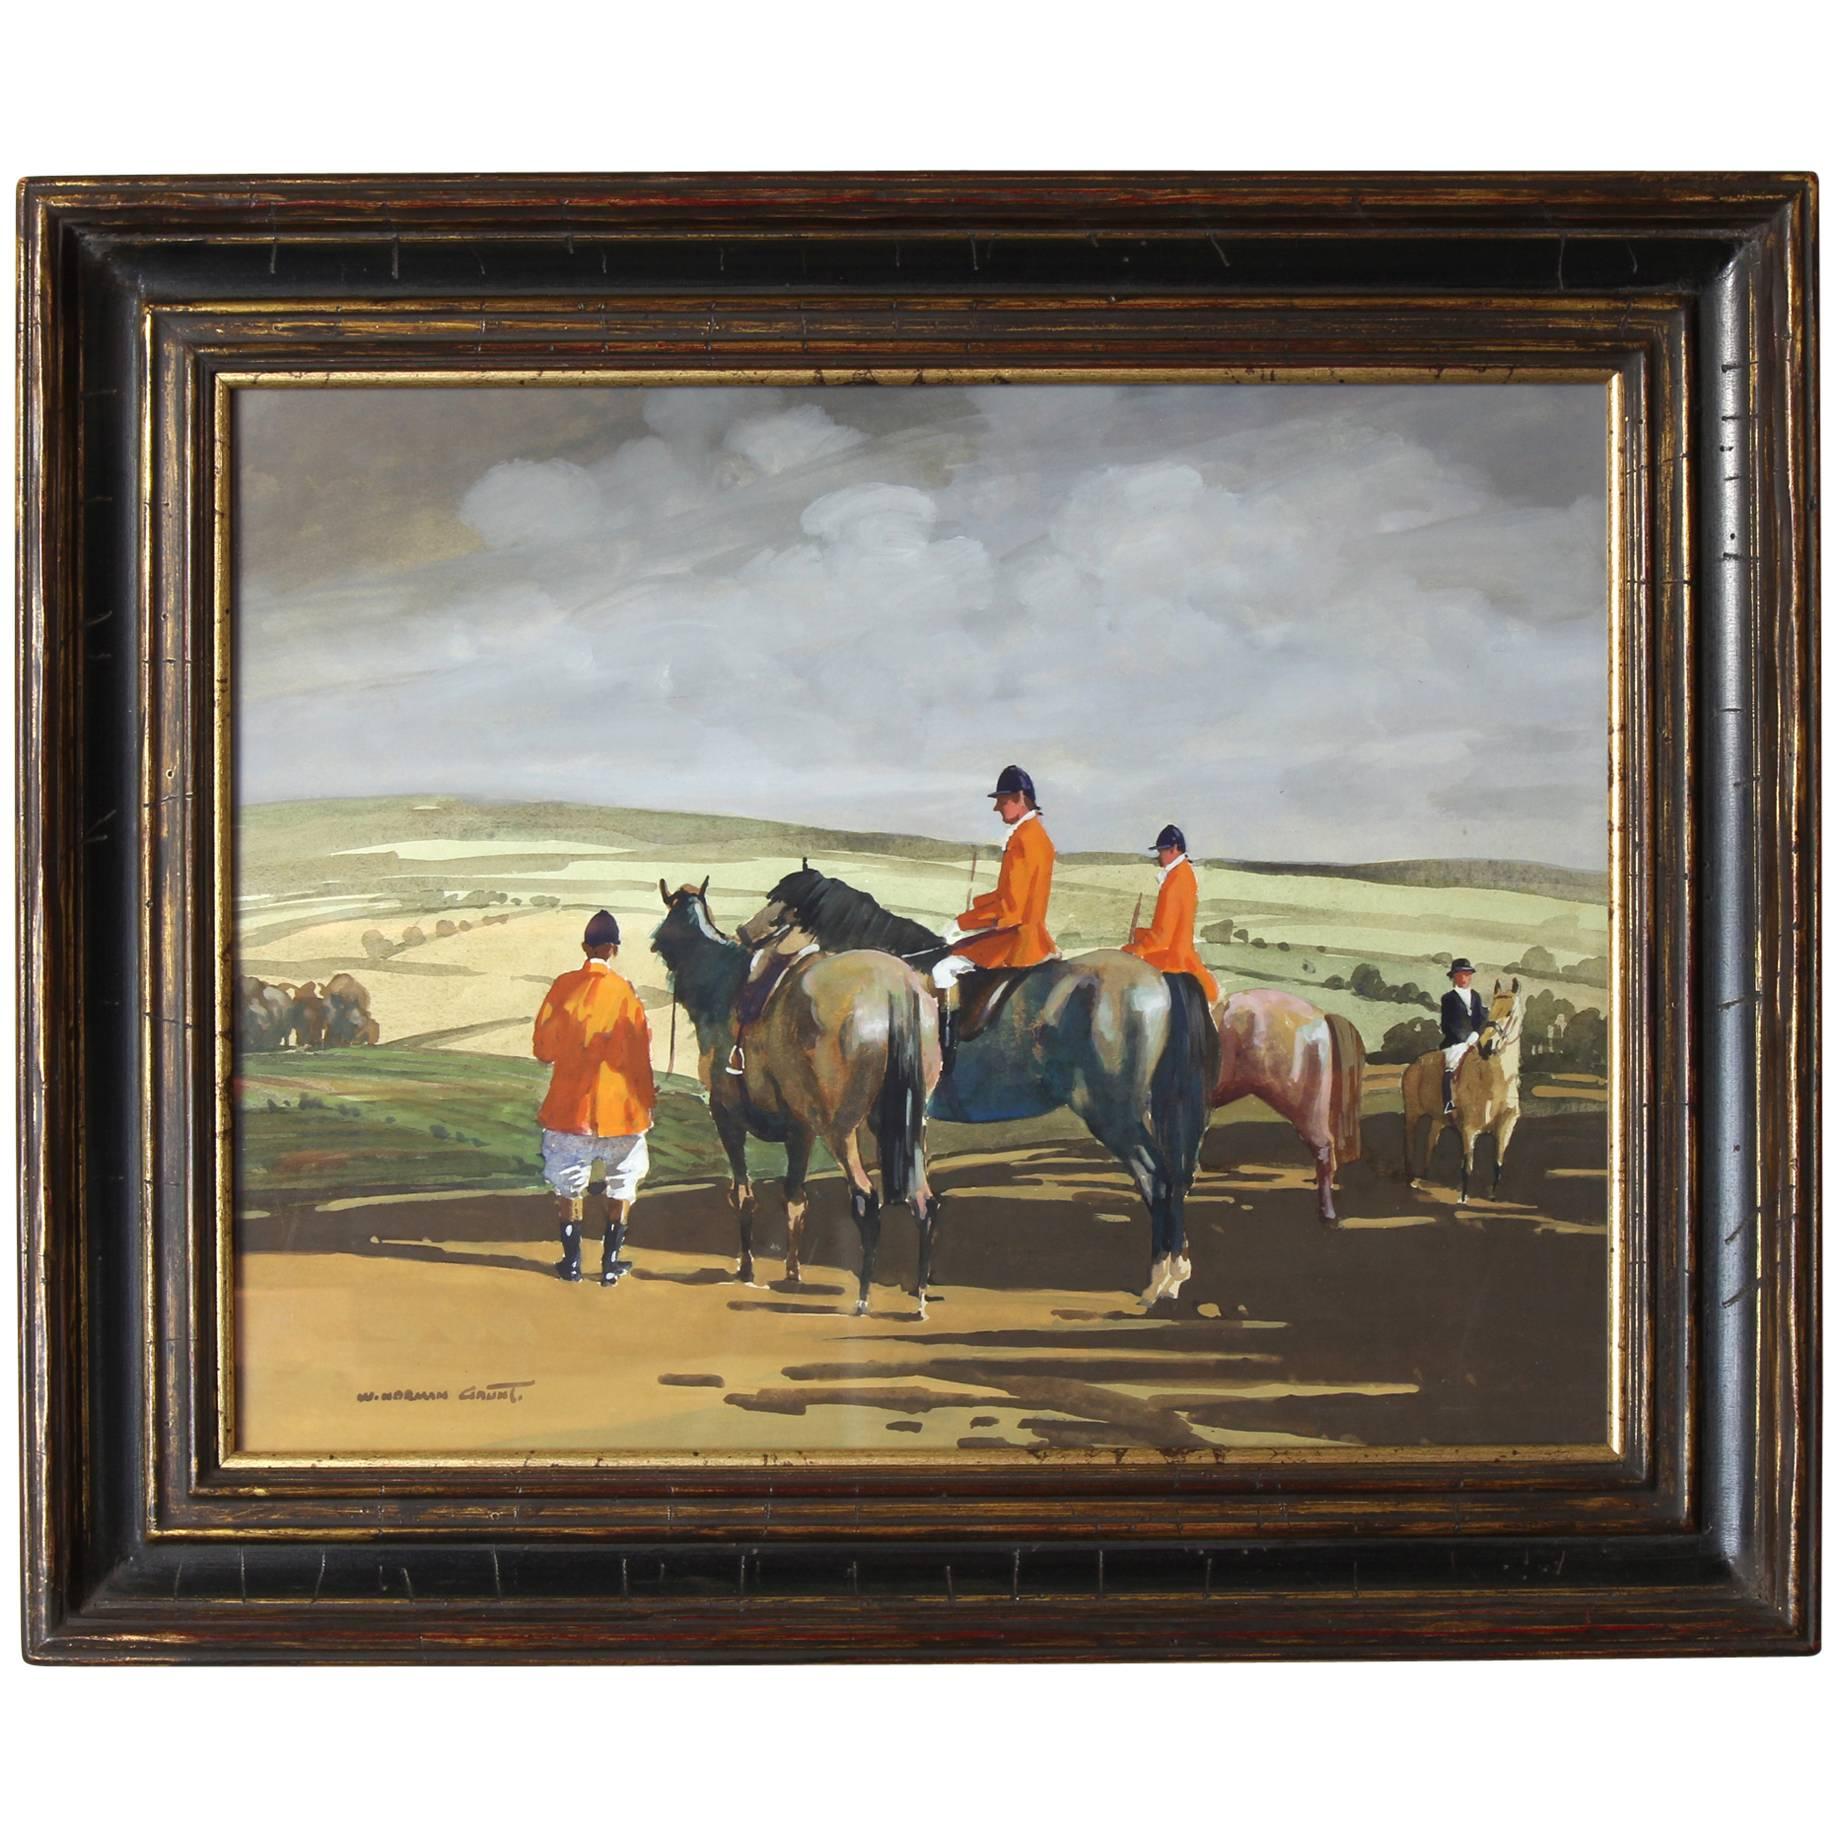 Large Sporting Painting by William N. Gaunt